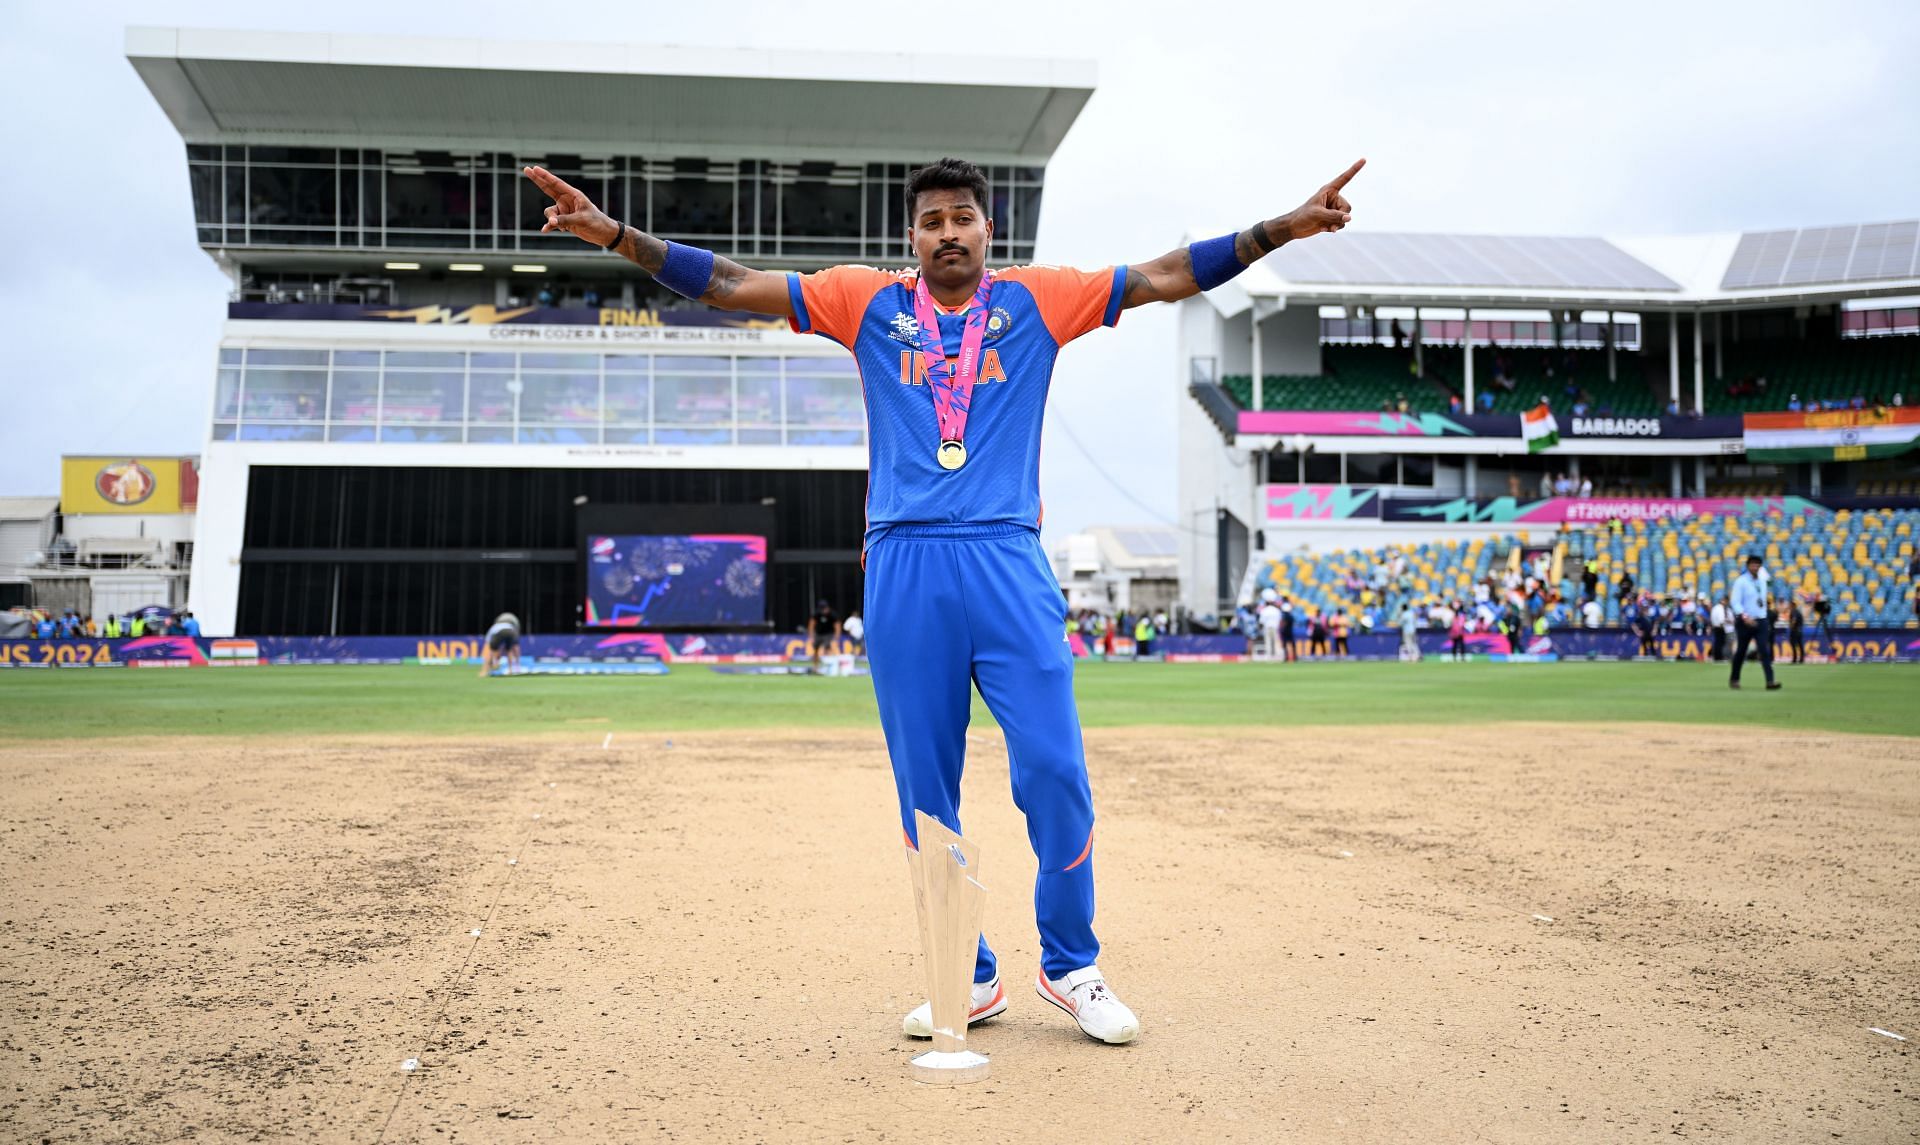 [Watch] Hardik Pandya nonchalantly takes a 'one-handed catch' during T20 World Cup victory parade in Vadodara